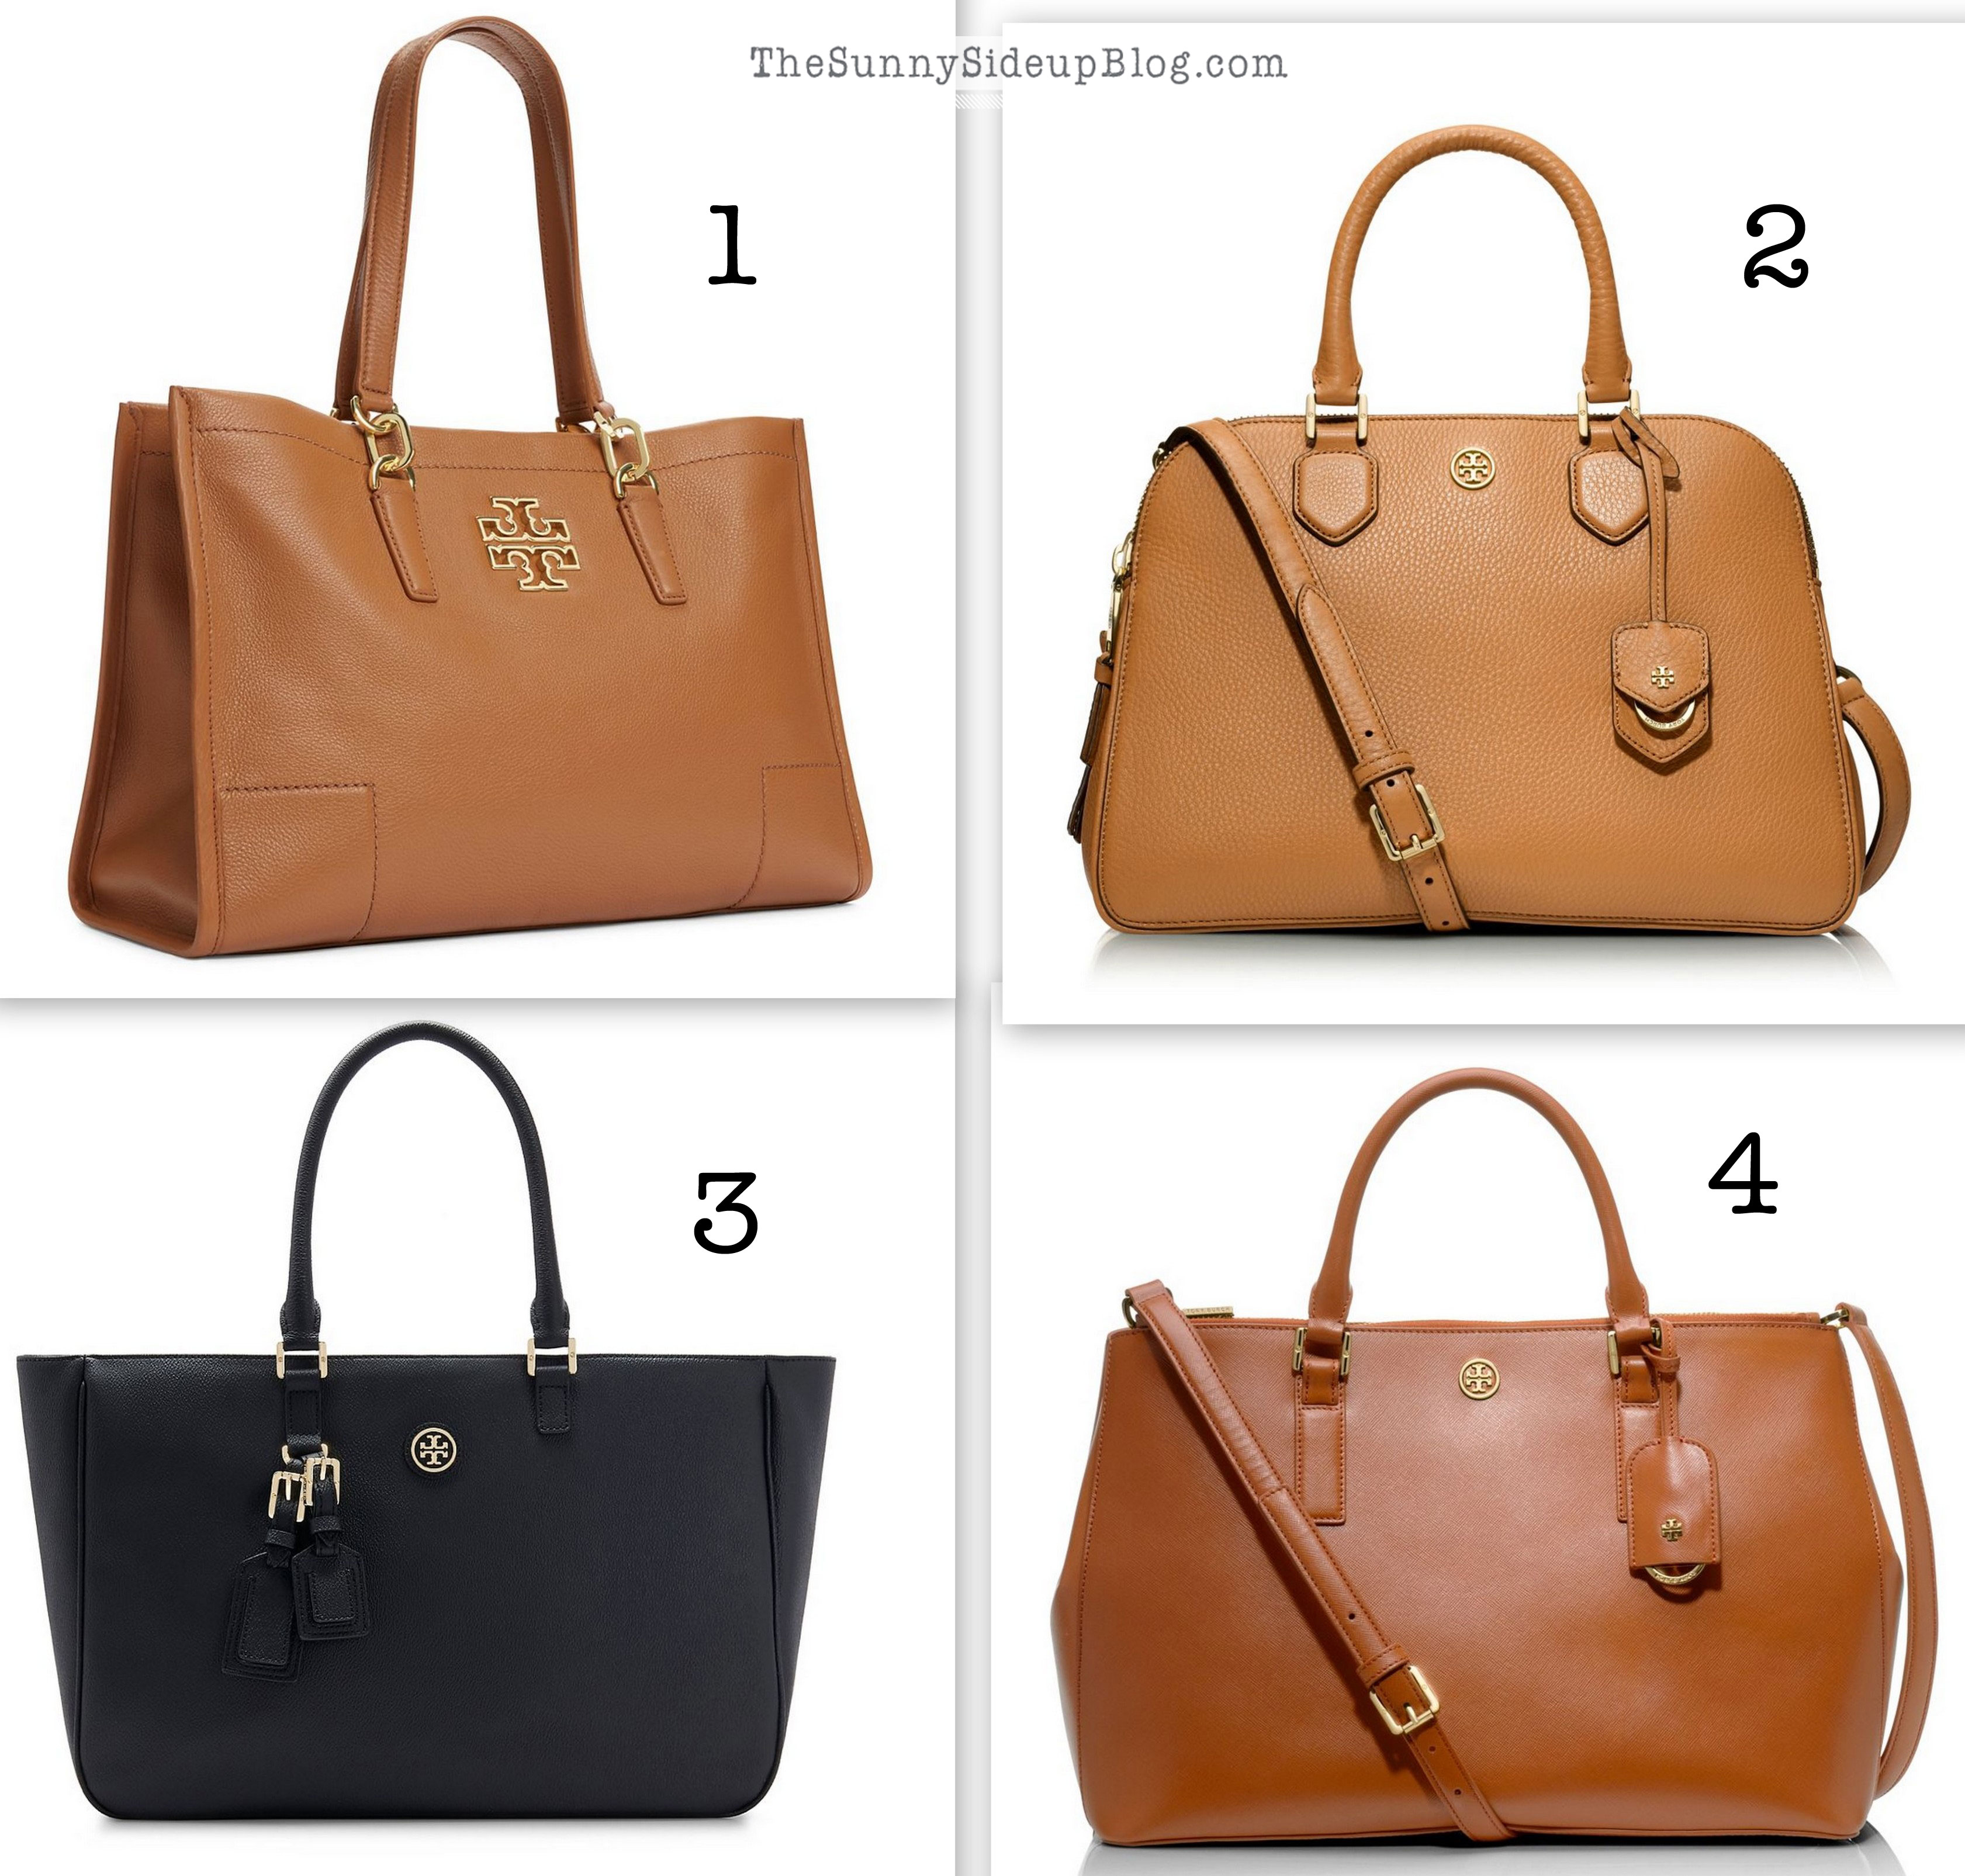 Favorite handbags for Fall - The Sunny Side Up Blog